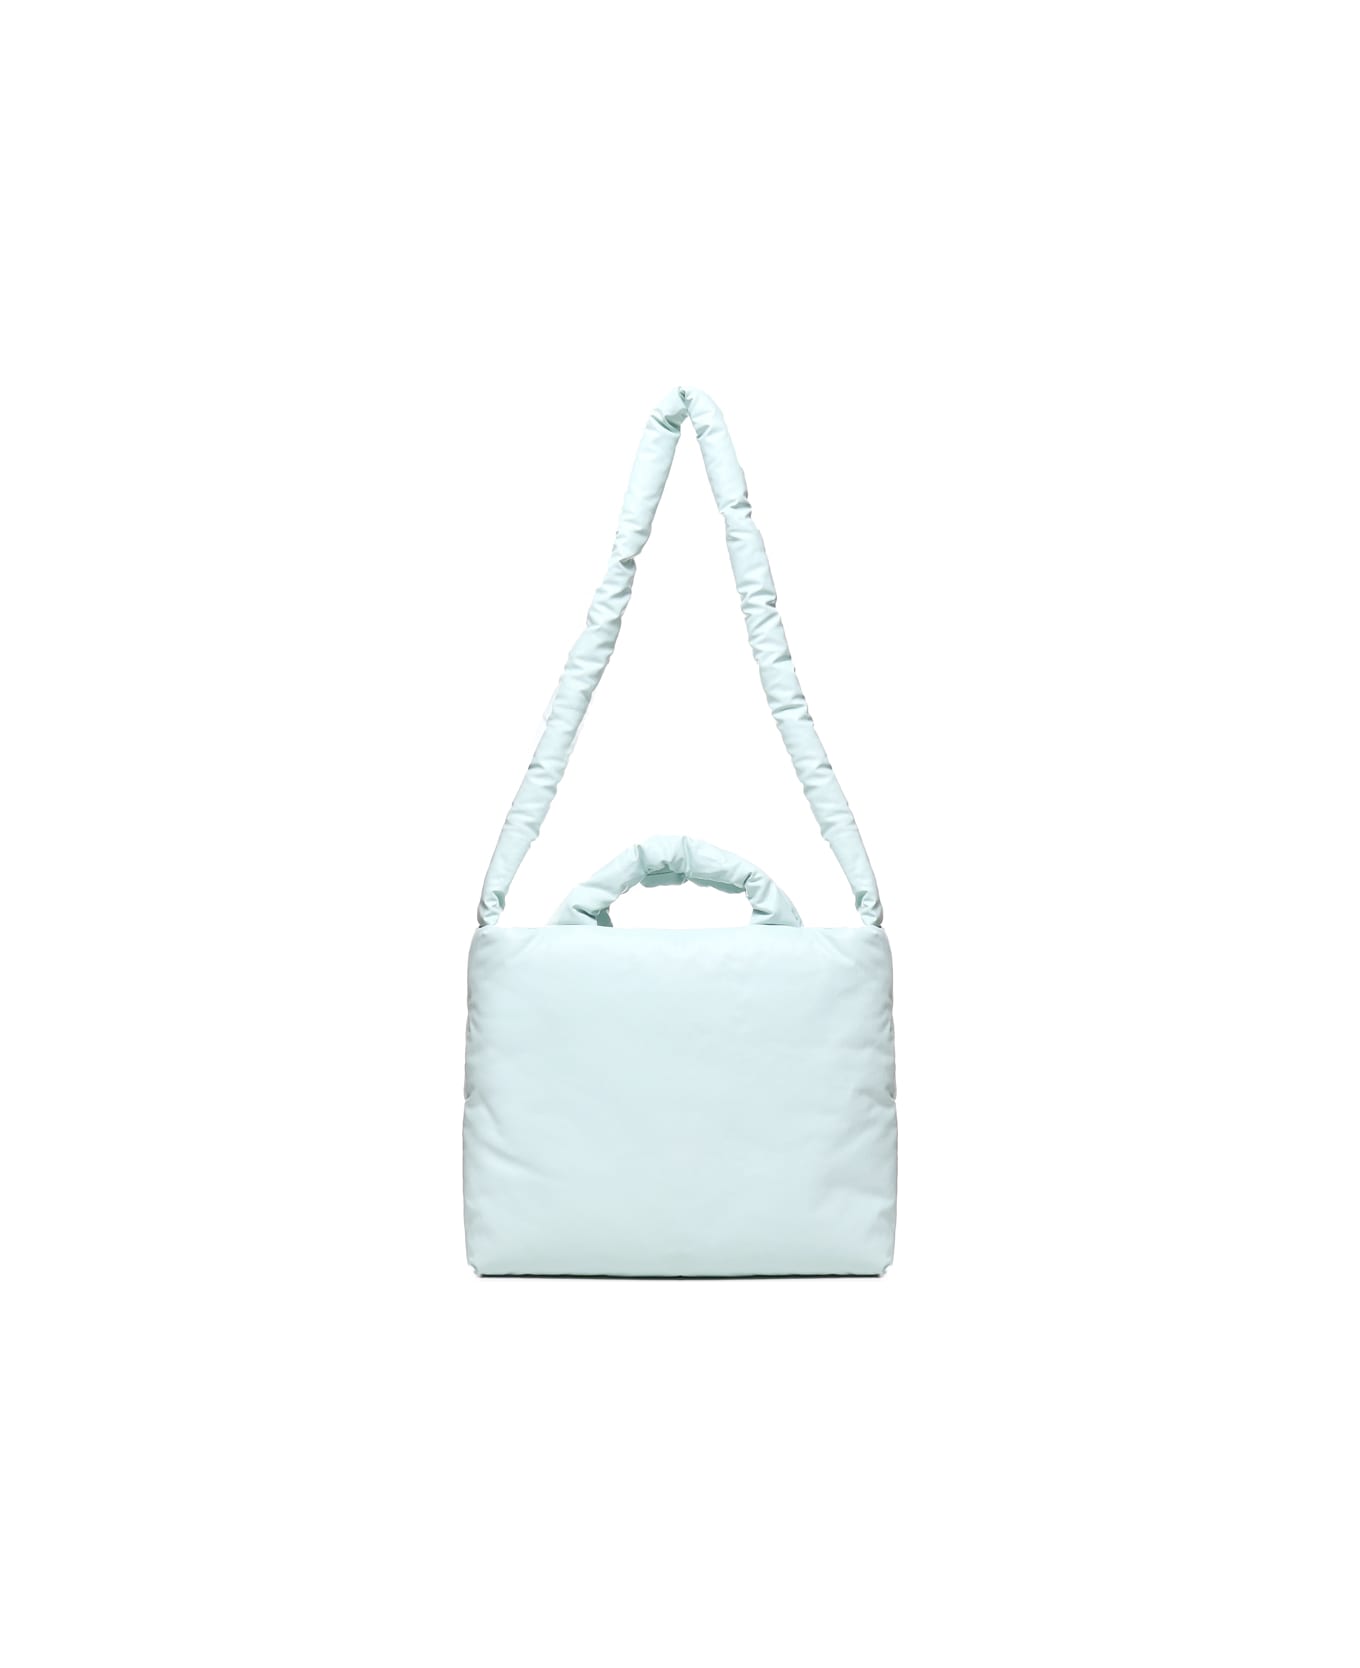 KASSL Editions Small Padded Pillow Bag - Ice トートバッグ